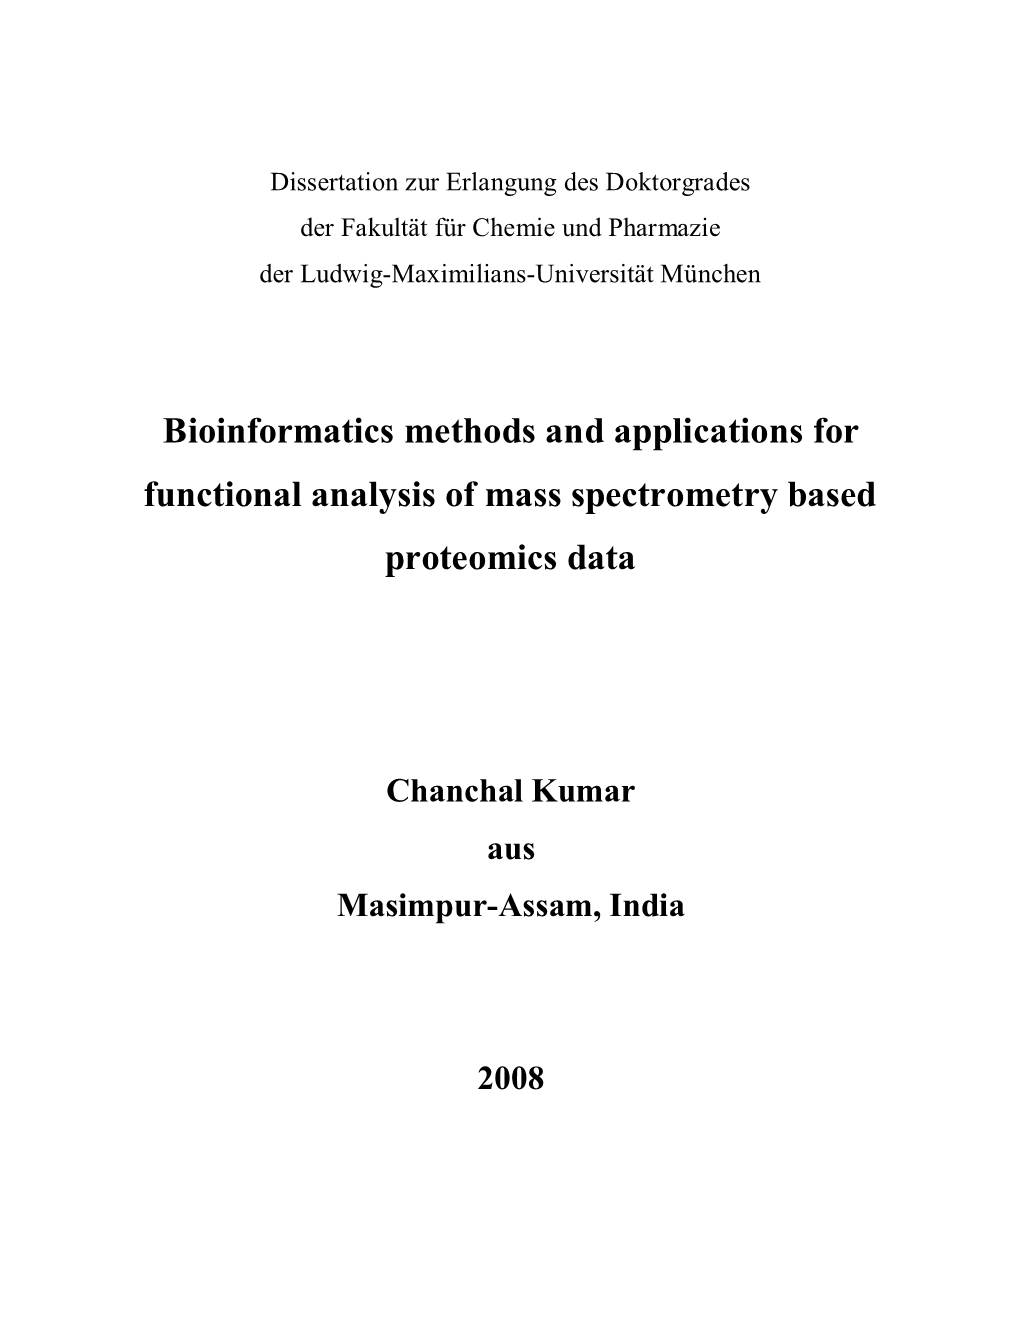 Bioinformatics Methods and Applications for Functional Analysis of Mass Spectrometry Based Proteomics Data